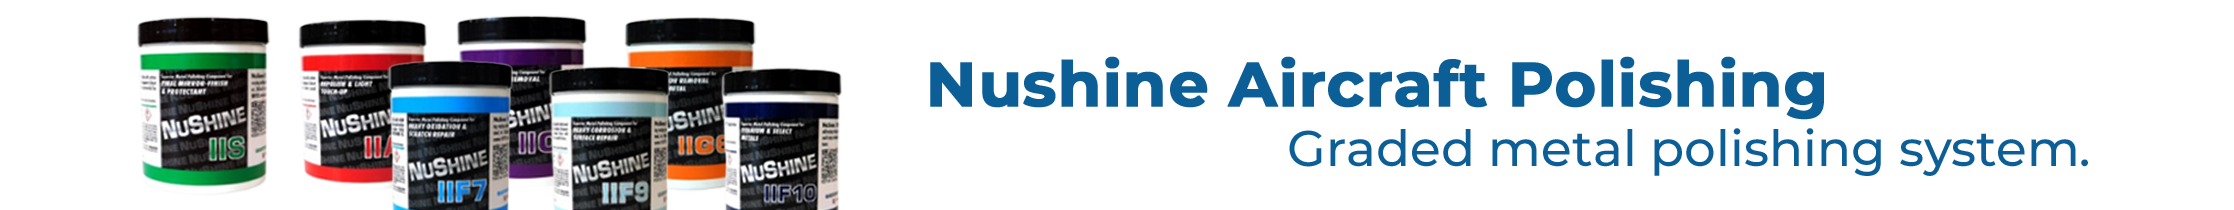 Nushine banner with text and tubs